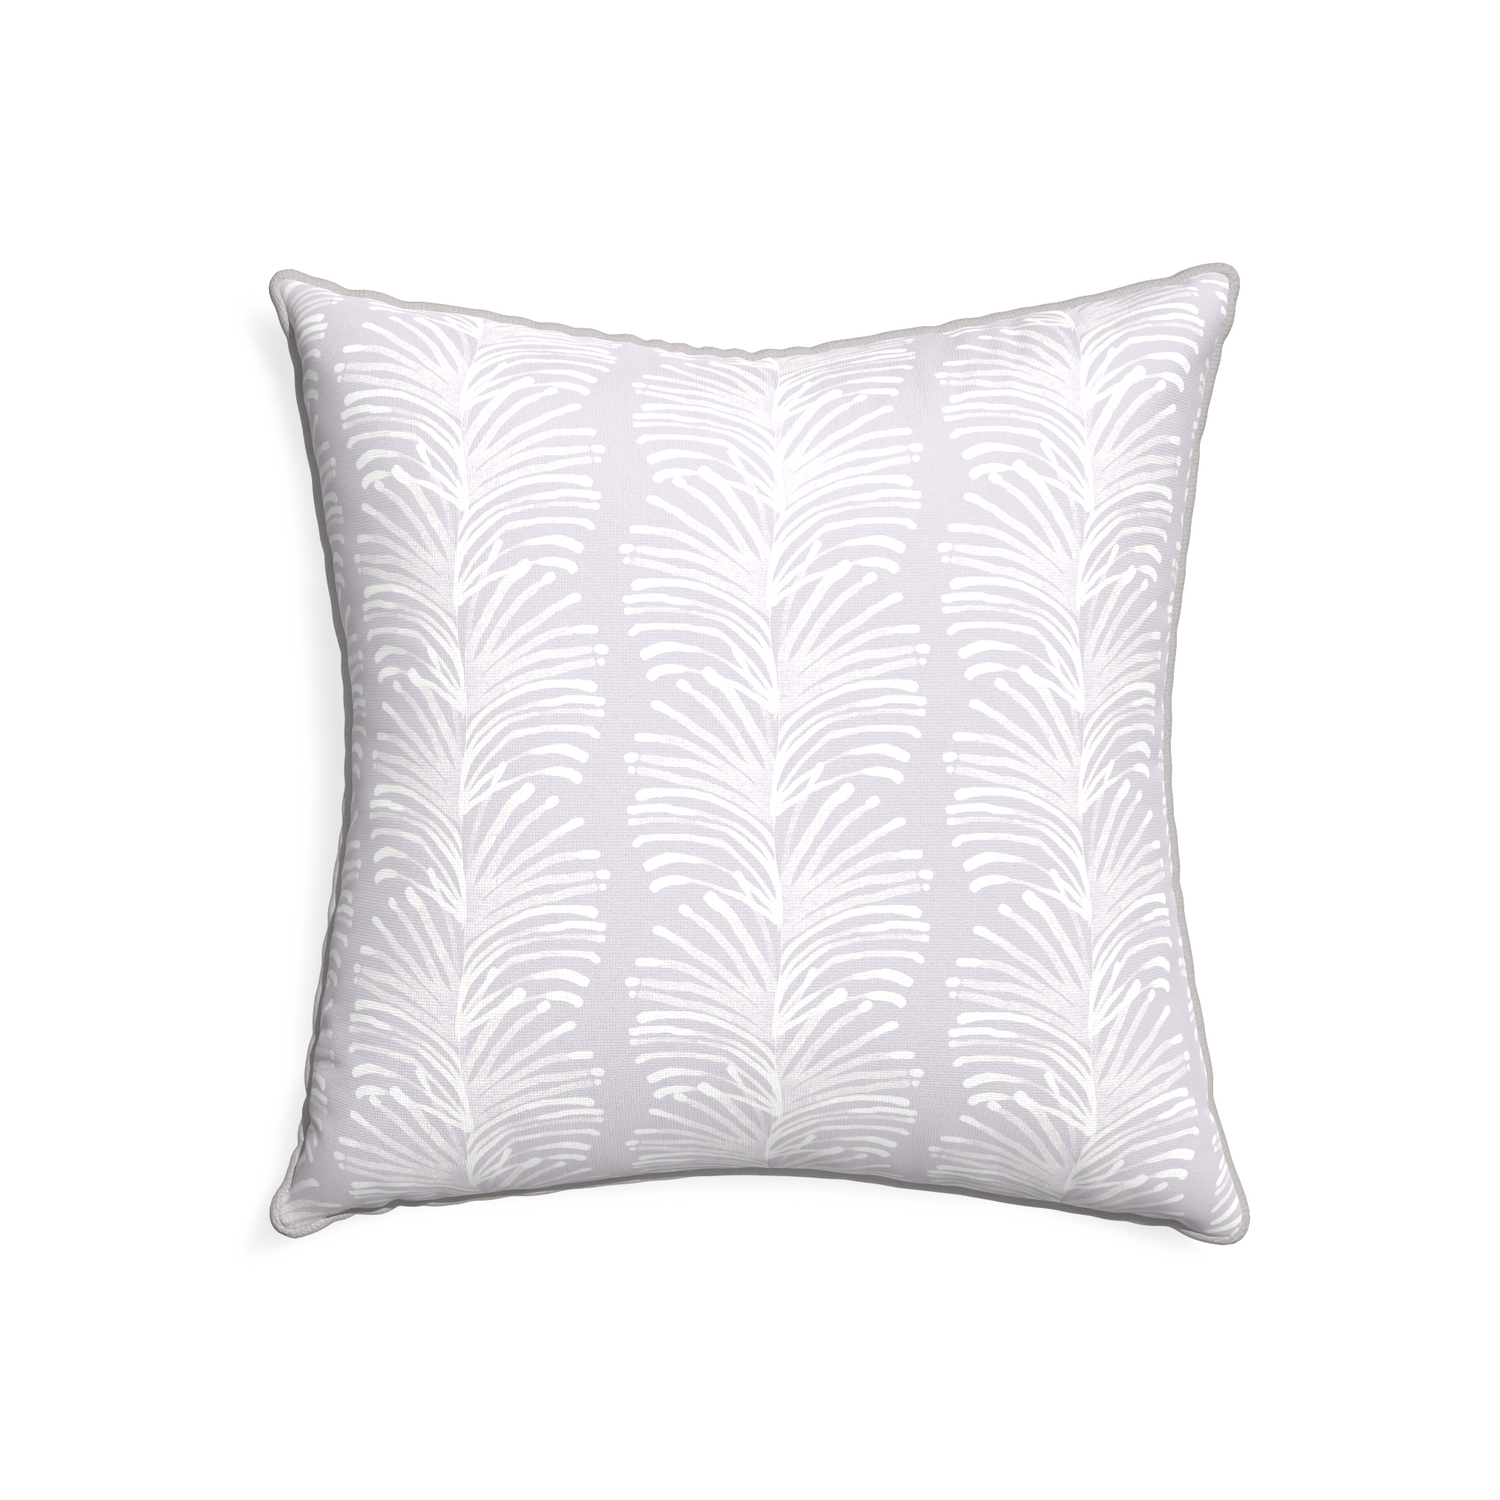 22-square emma lavender custom pillow with pebble piping on white background